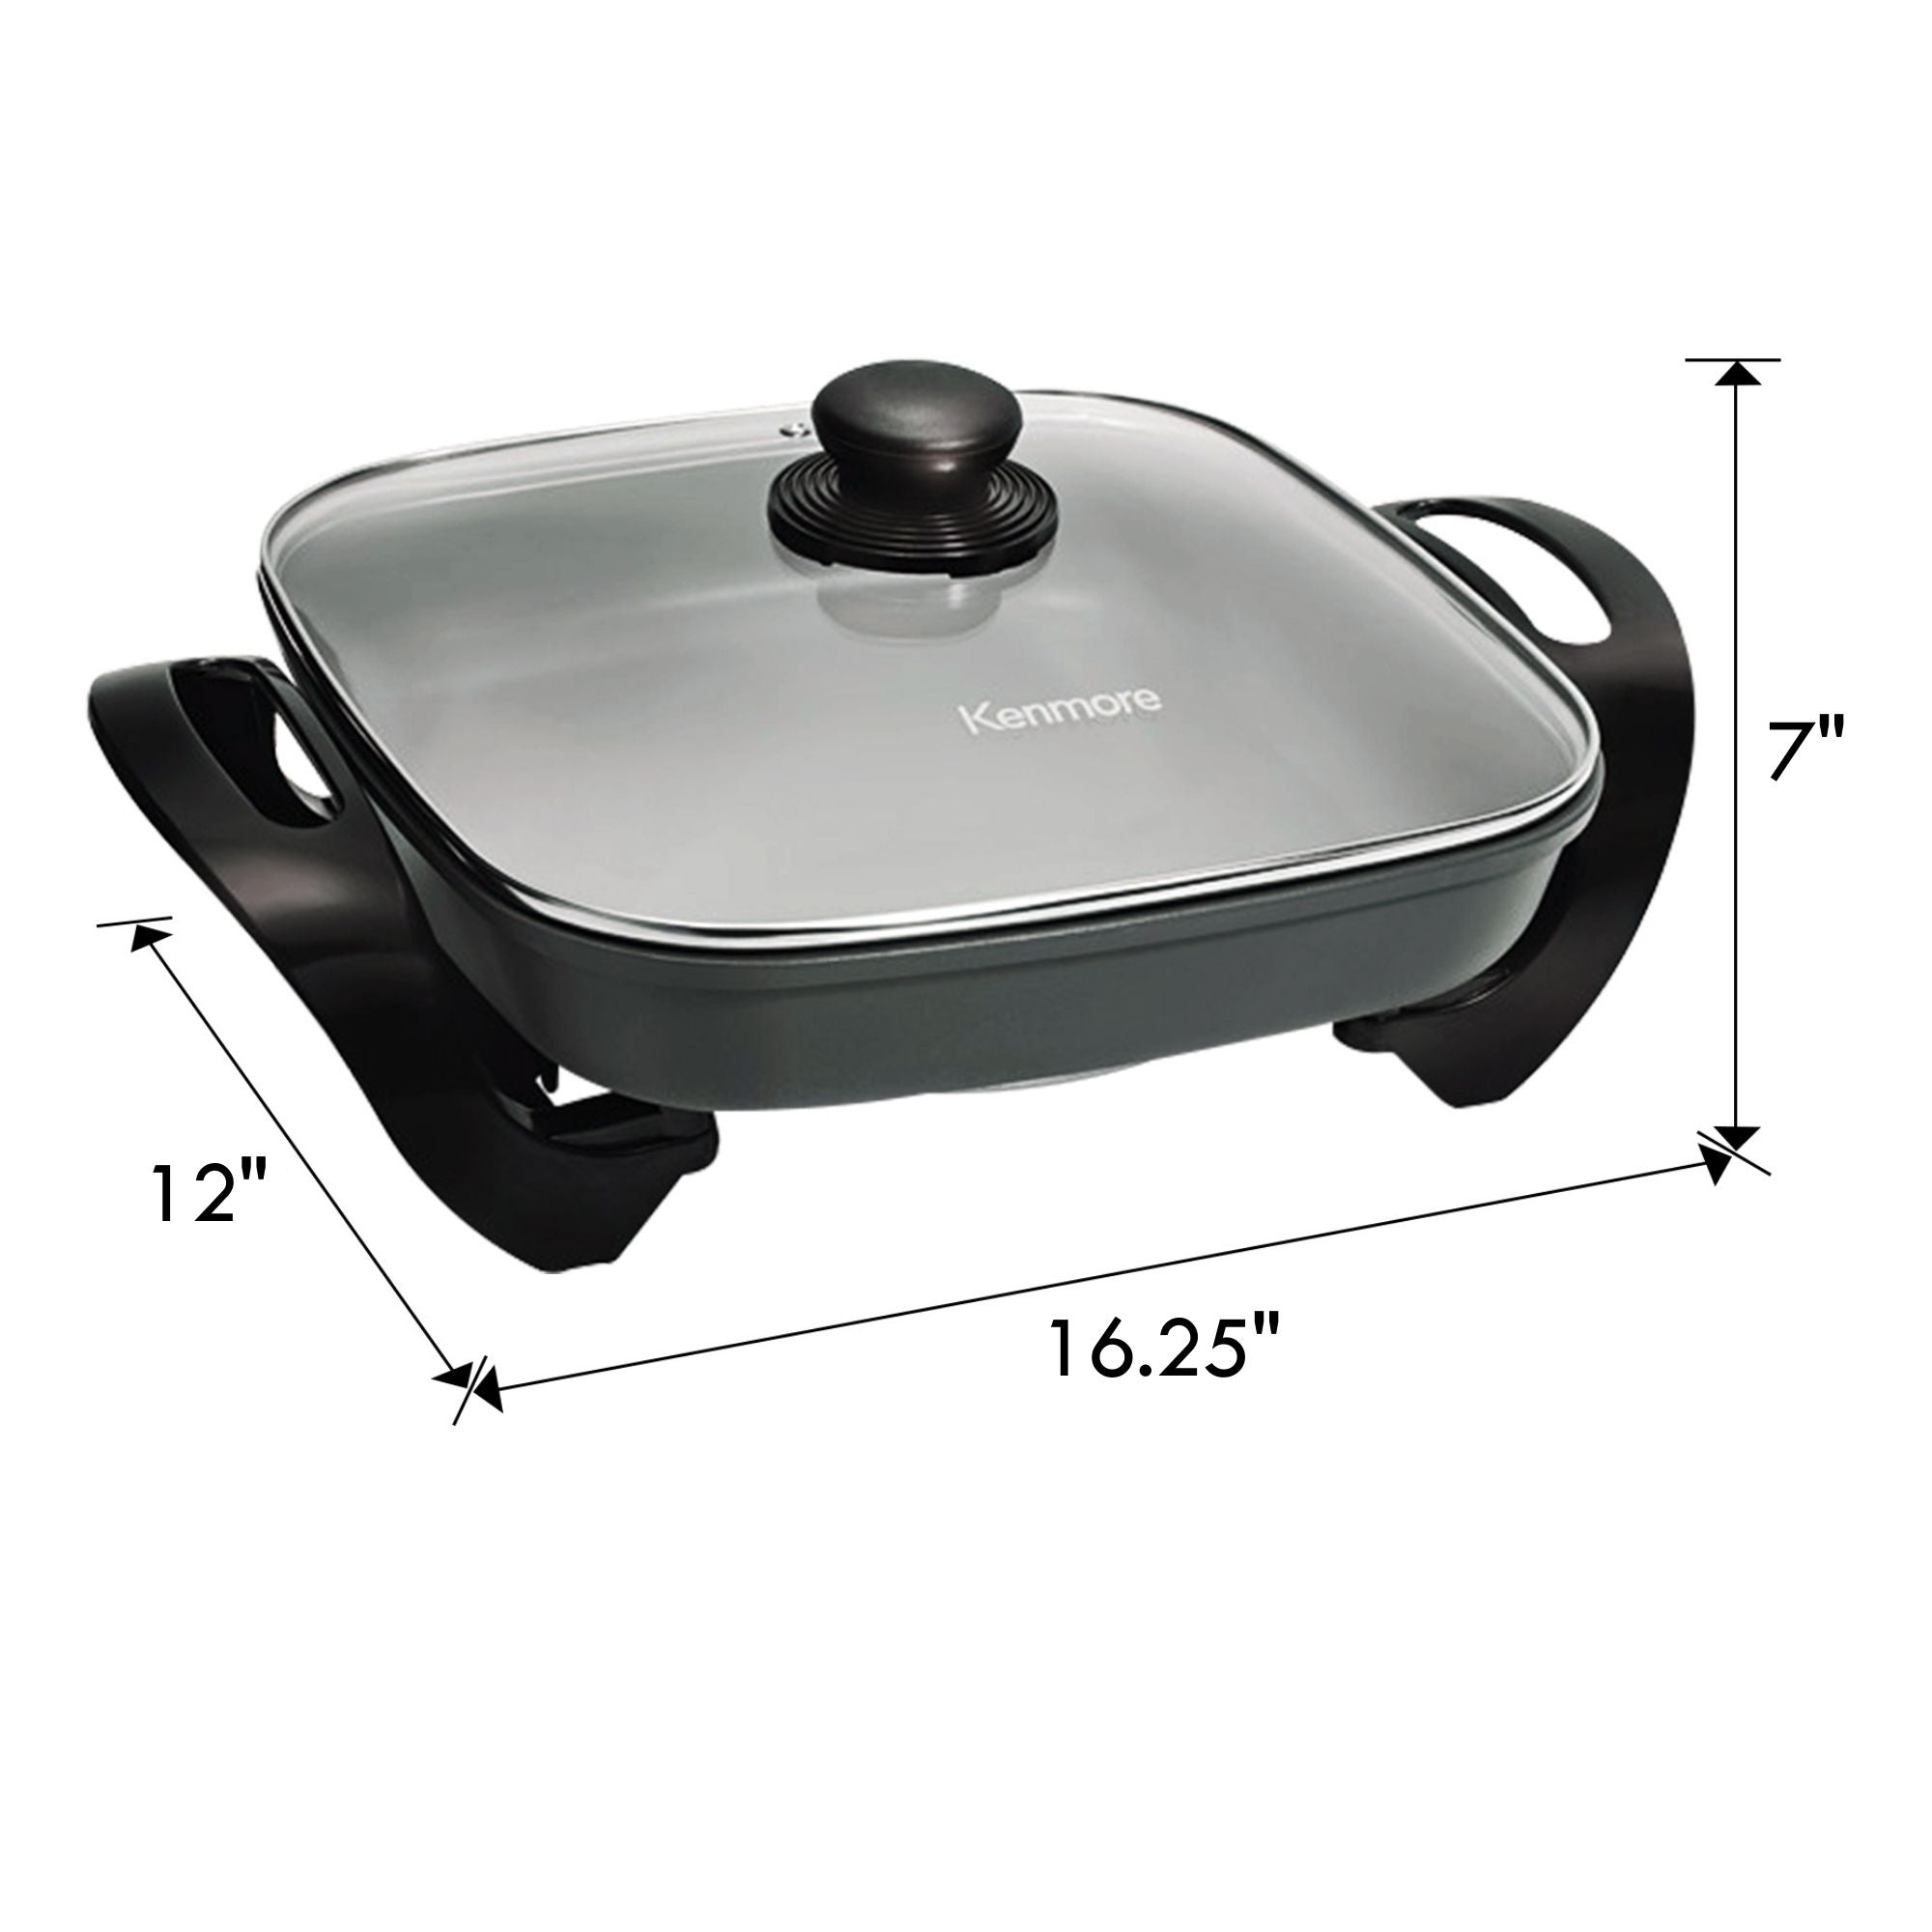 Kenmore non-stick electric skillet with glass lid on a white background with dimensions labeled